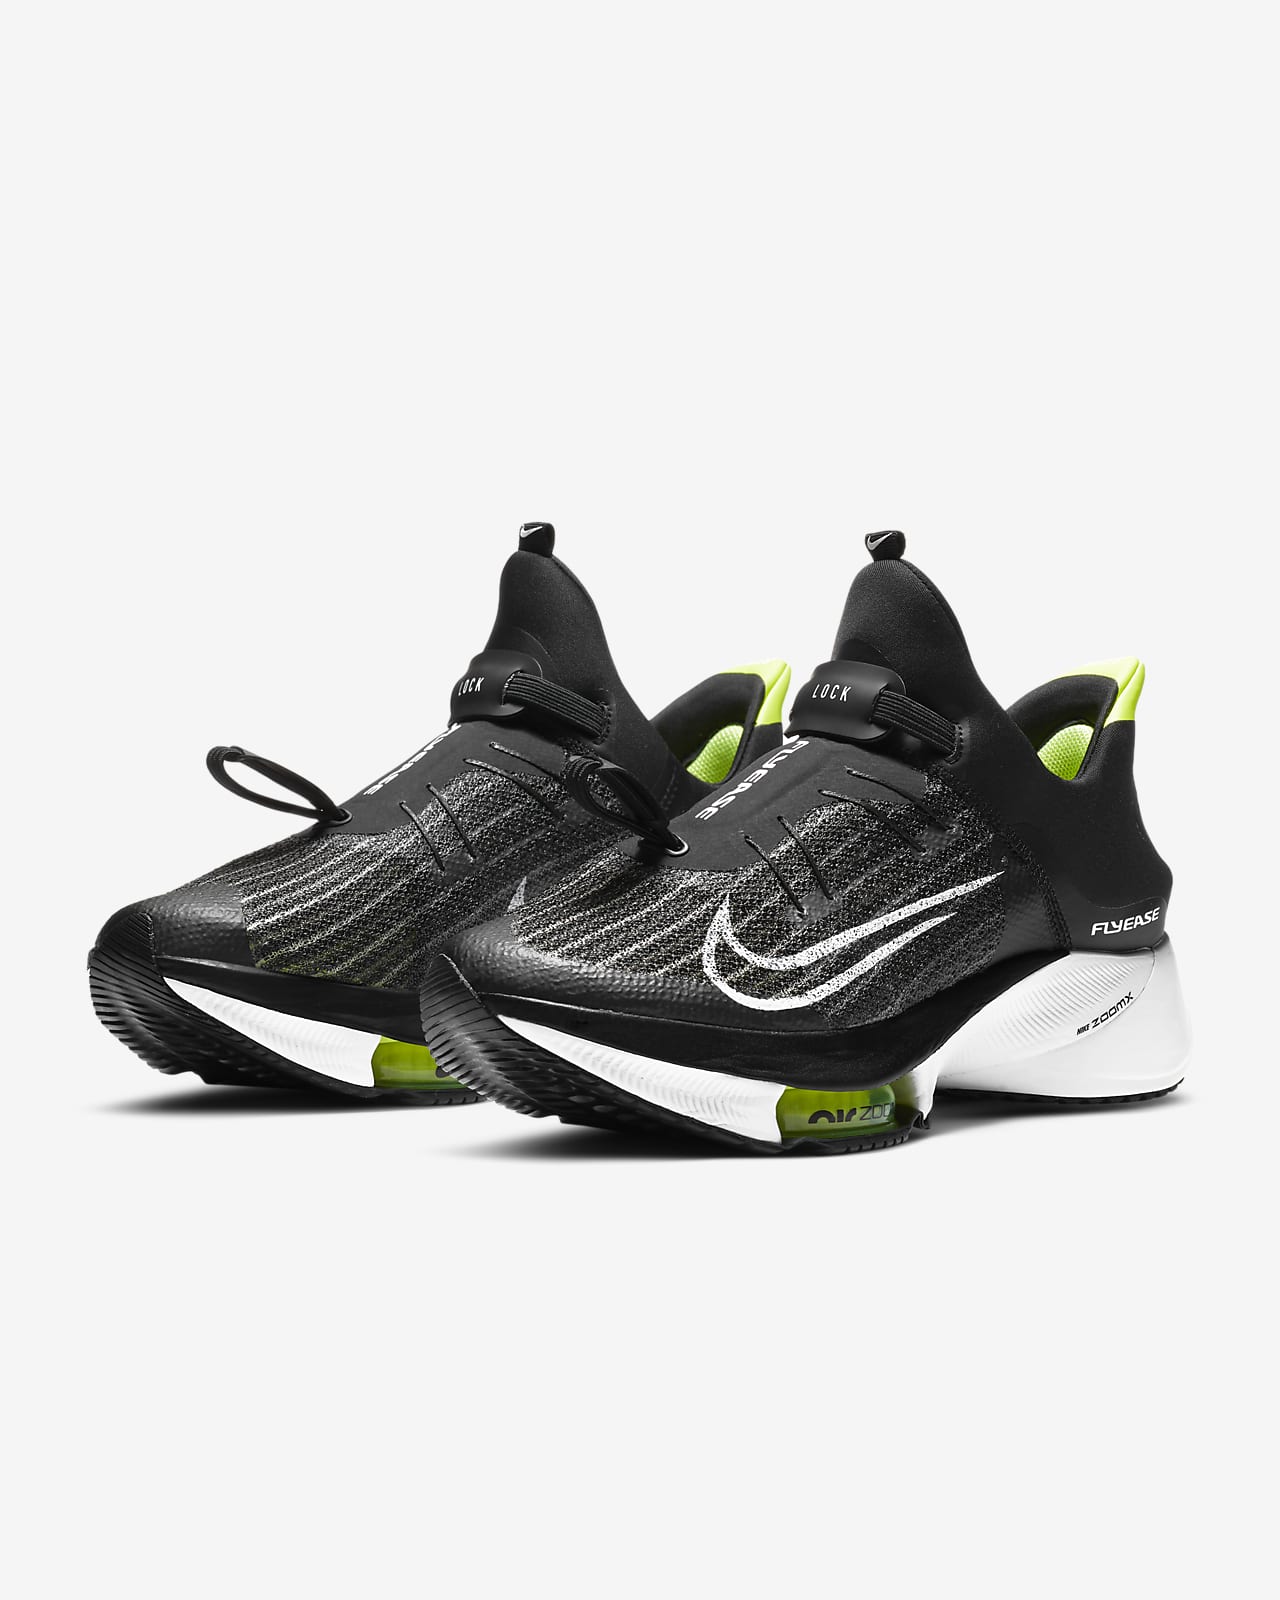 nike air zoom tempo next flyease review